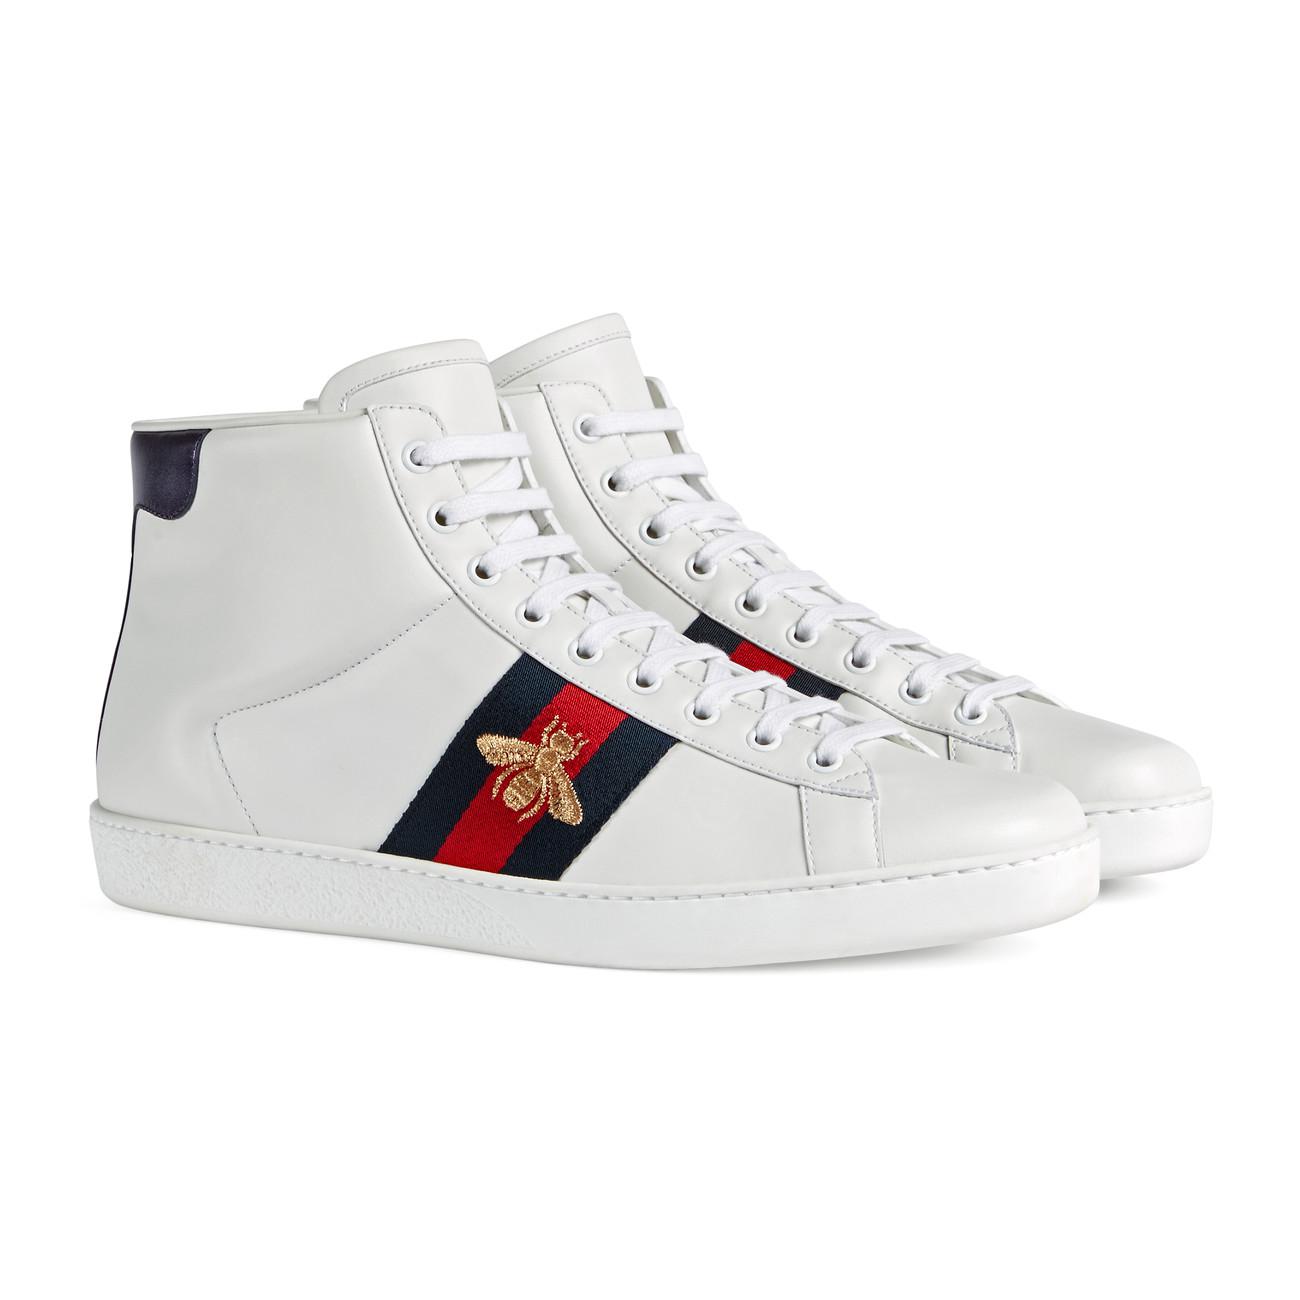 Gucci Leather Ace High-top Sneaker in Blue for Men - Lyst